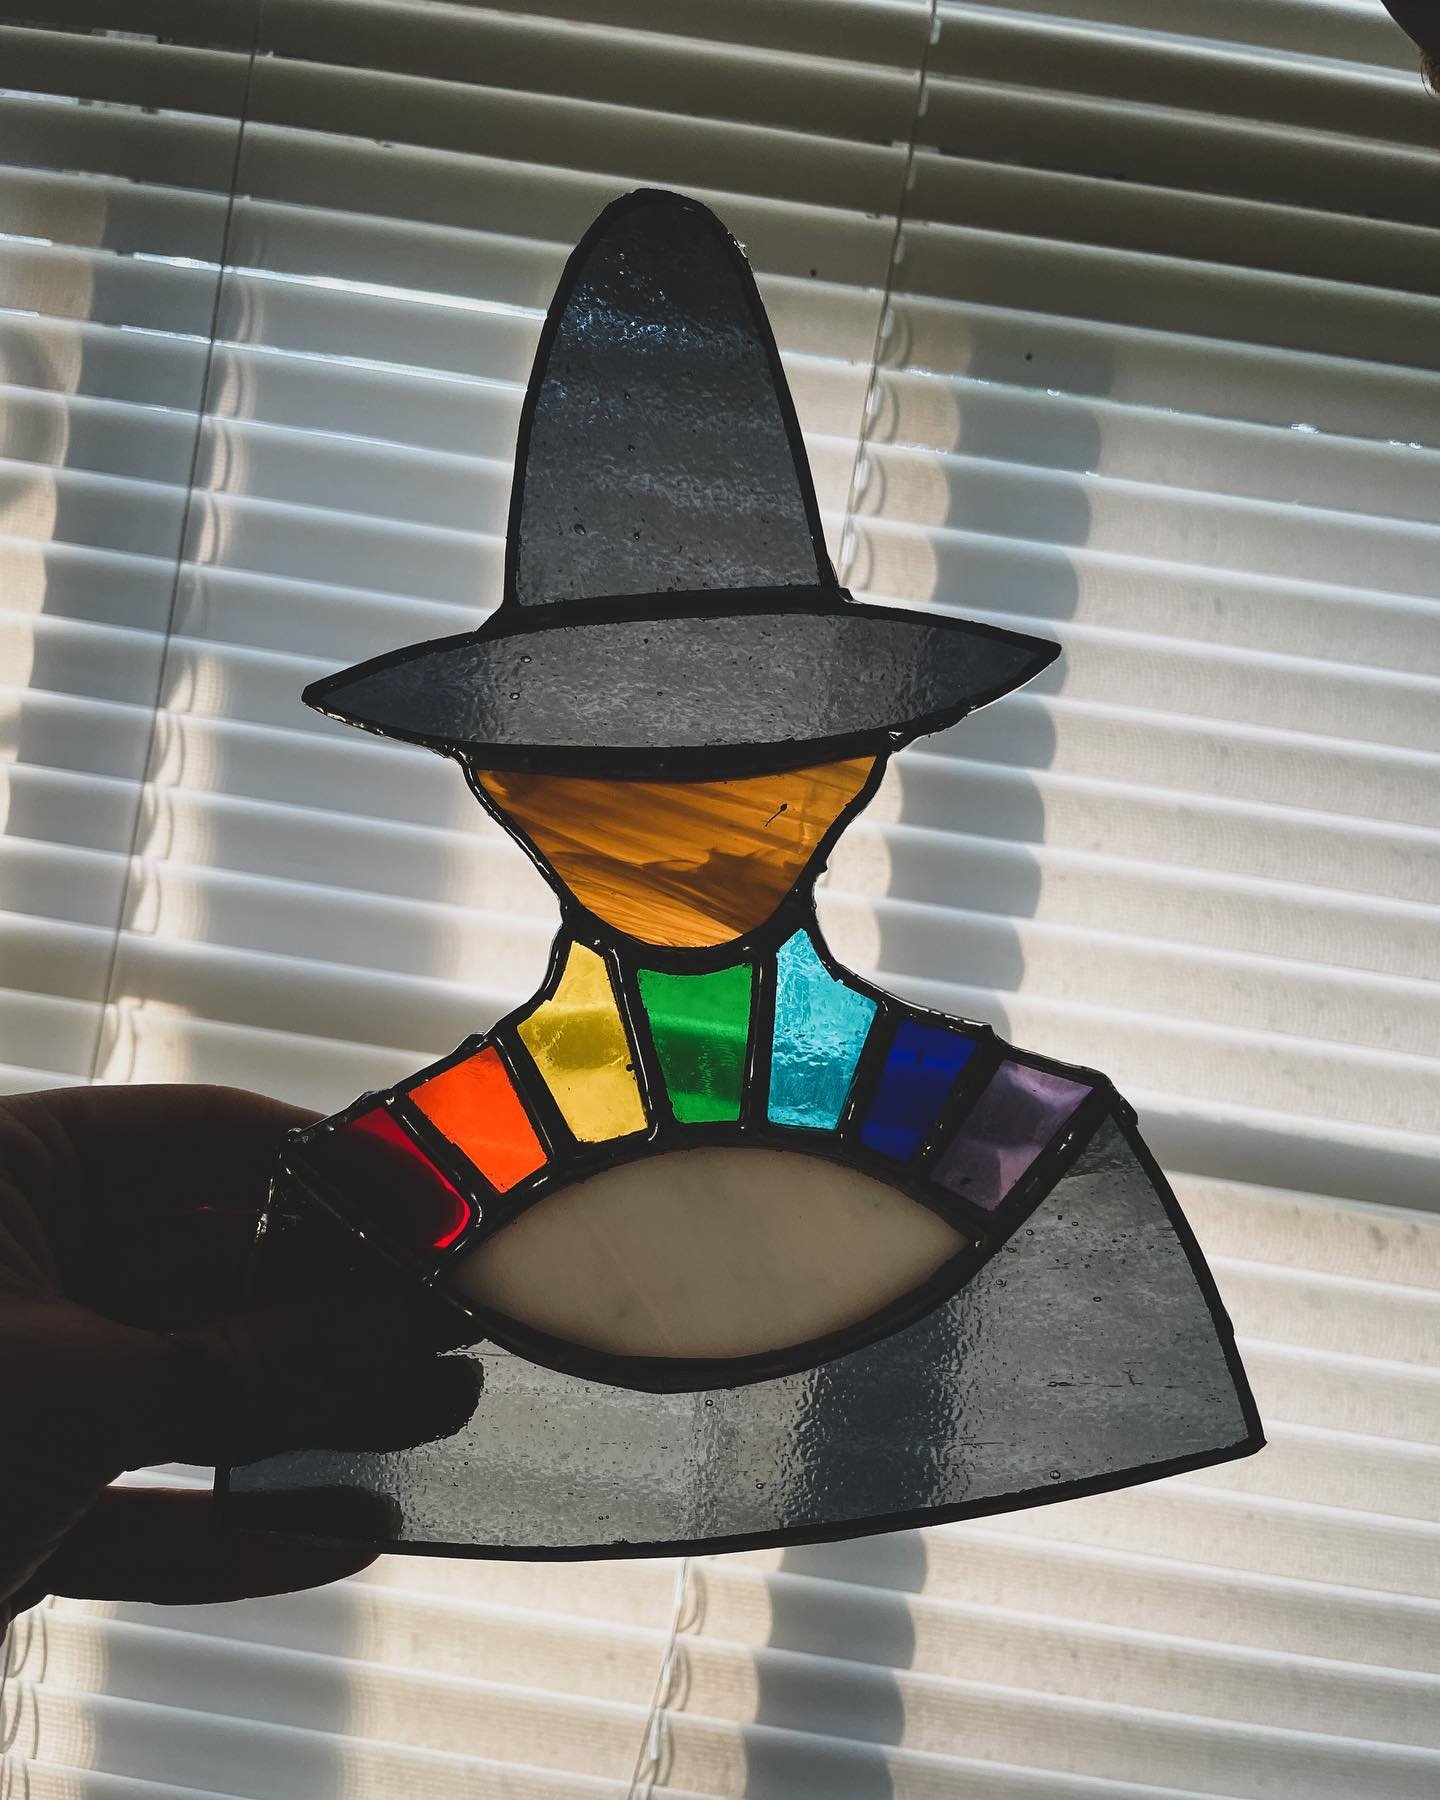 Some of my recent stained glass pieces!! @ladyshatterweb 🕸